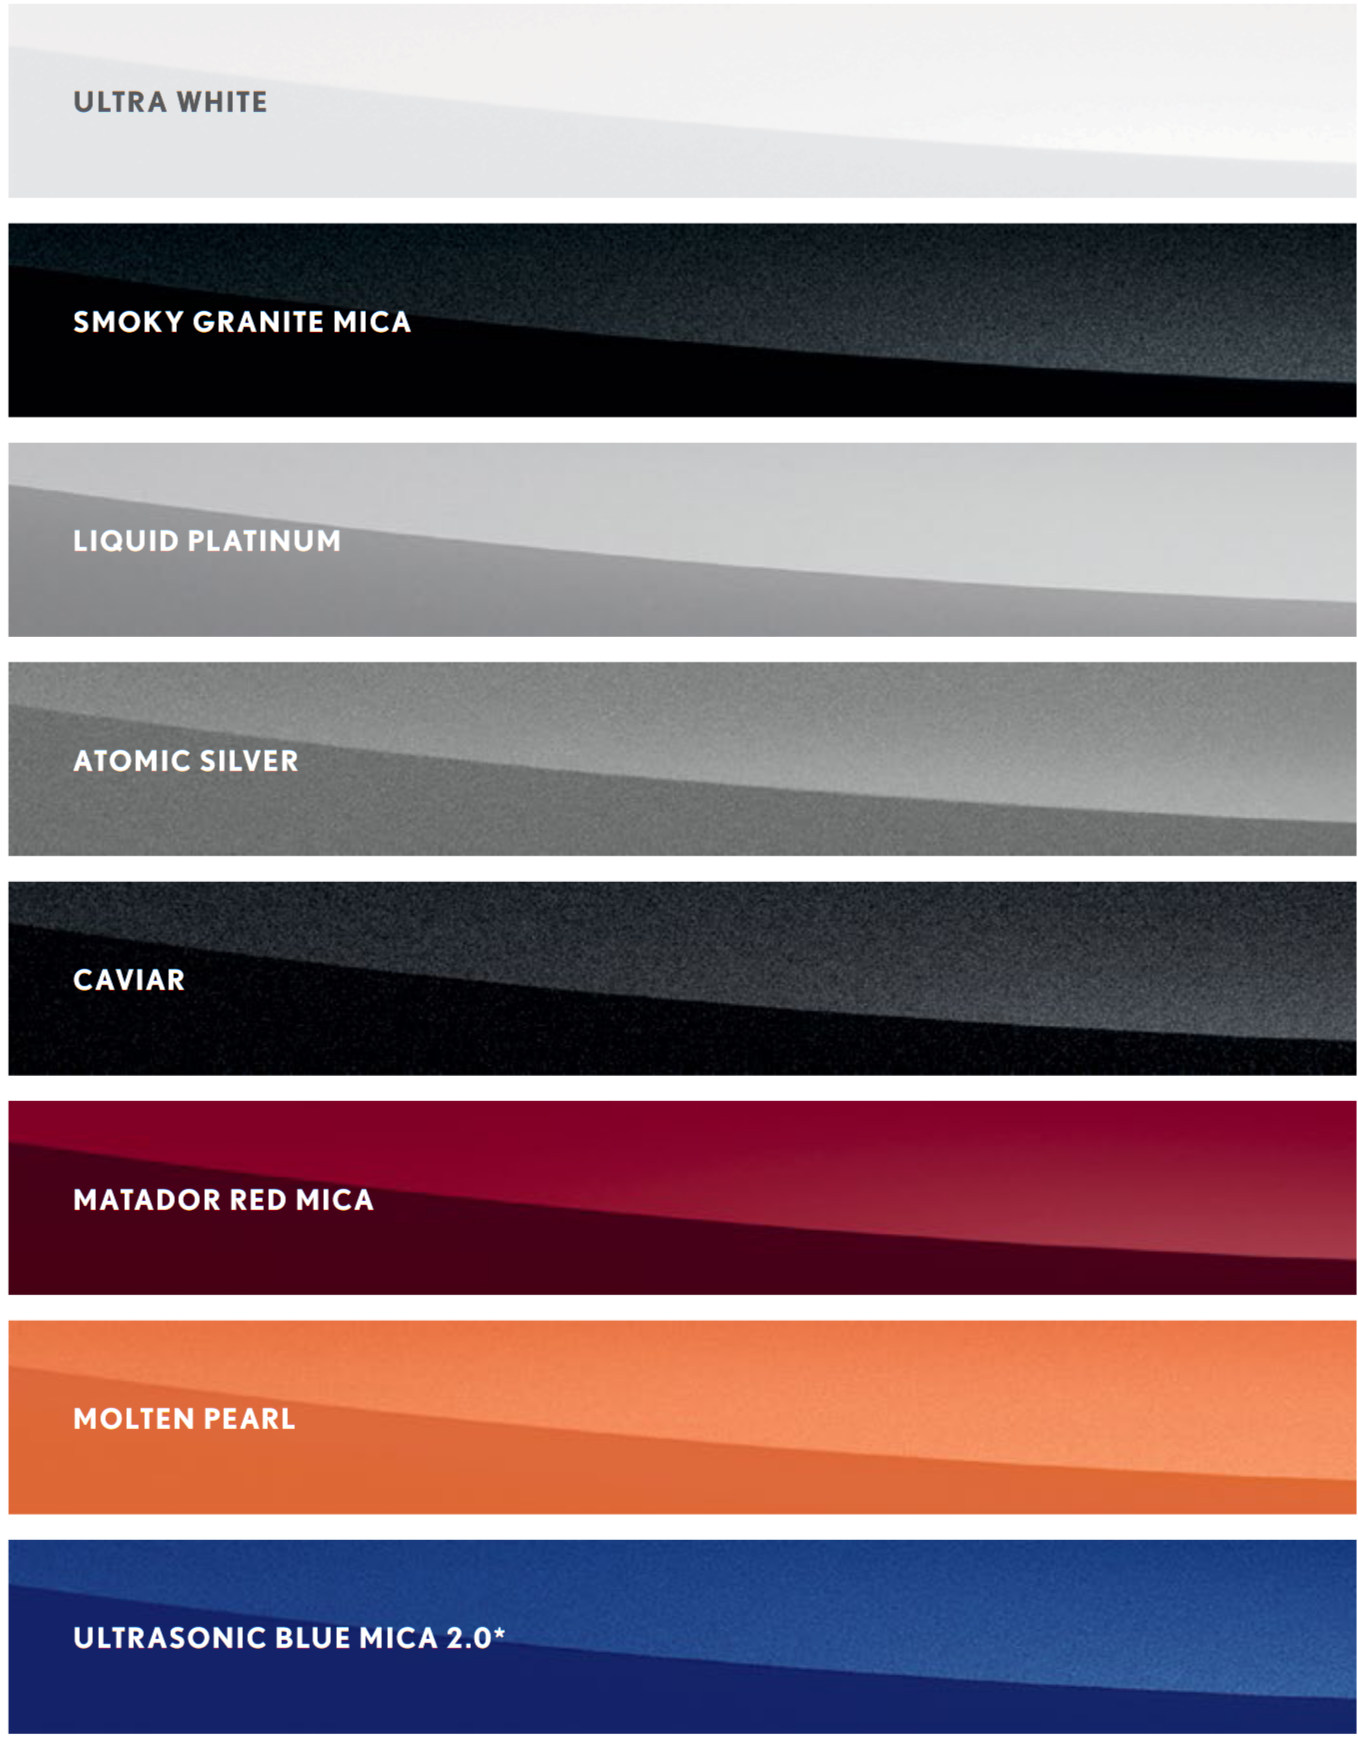 a photo showing what colors this model of lexus came in 